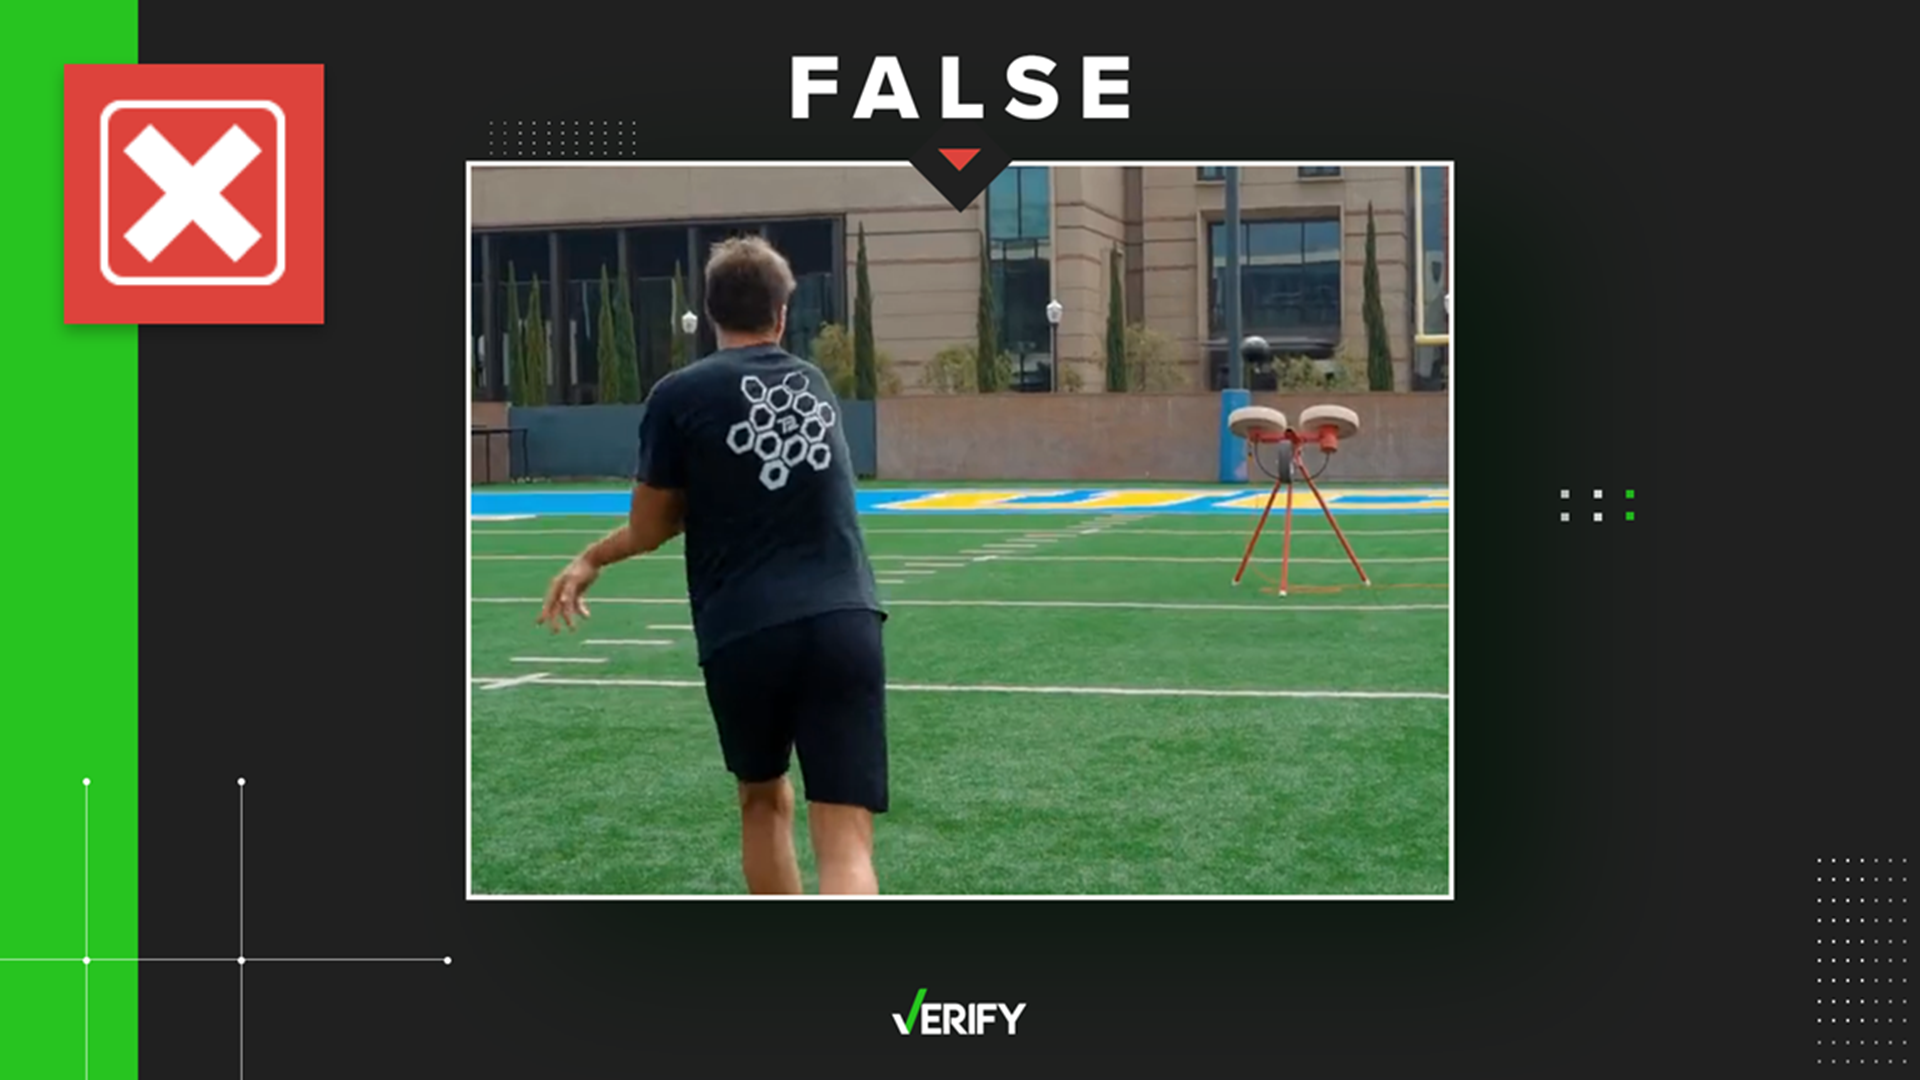 Tampa Bay Buccaneers QB Tom Brady showed off his accuracy by throwing to a throwing machine, but the video was created by a digital artist.